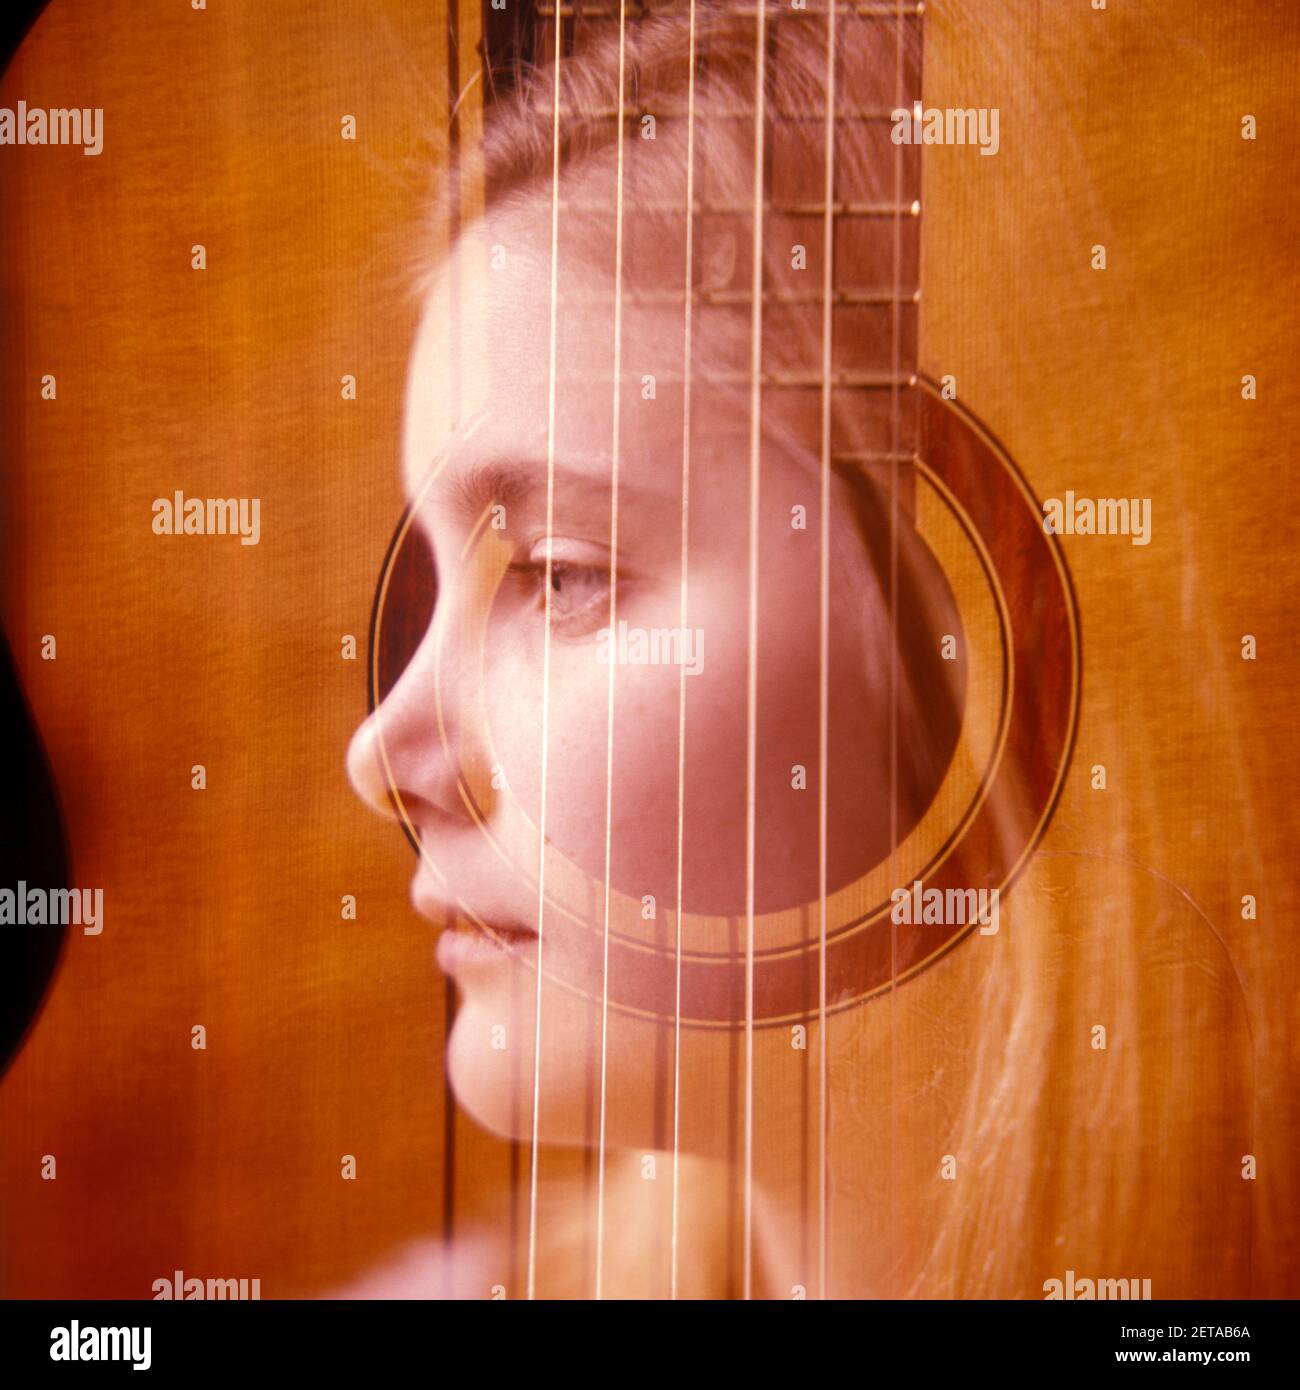 1970s 1980s HEAD PROFILE BLONDE GIRL MOODY WITH CENTER & STRINGS OF ACOUSTIC GUITAR SUPERIMPOSED MUSIC  - kj8886 AMF001 HARS PENSIVE PERSONS THOUGHTFUL INSPIRATION TEENAGE GIRL STRINGS SADNESS DREAMS HEAD AND SHOULDERS DISCOVERY ACOUSTIC COMPOSITE SONG REFLECTIVE THINK OPPORTUNITY REFLECTING MUSICAL INSTRUMENT PONDER PONDERING CONSIDER LOST IN THOUGHT FOLK IMAGINATION TEENAGED CONTEMPLATIVE MEDITATE CREATIVITY JUVENILES MEDITATIVE PRE-TEEN PRE-TEEN GIRL CAUCASIAN ETHNICITY CONSIDERING OLD FASHIONED SUPERIMPOSED Stock Photo